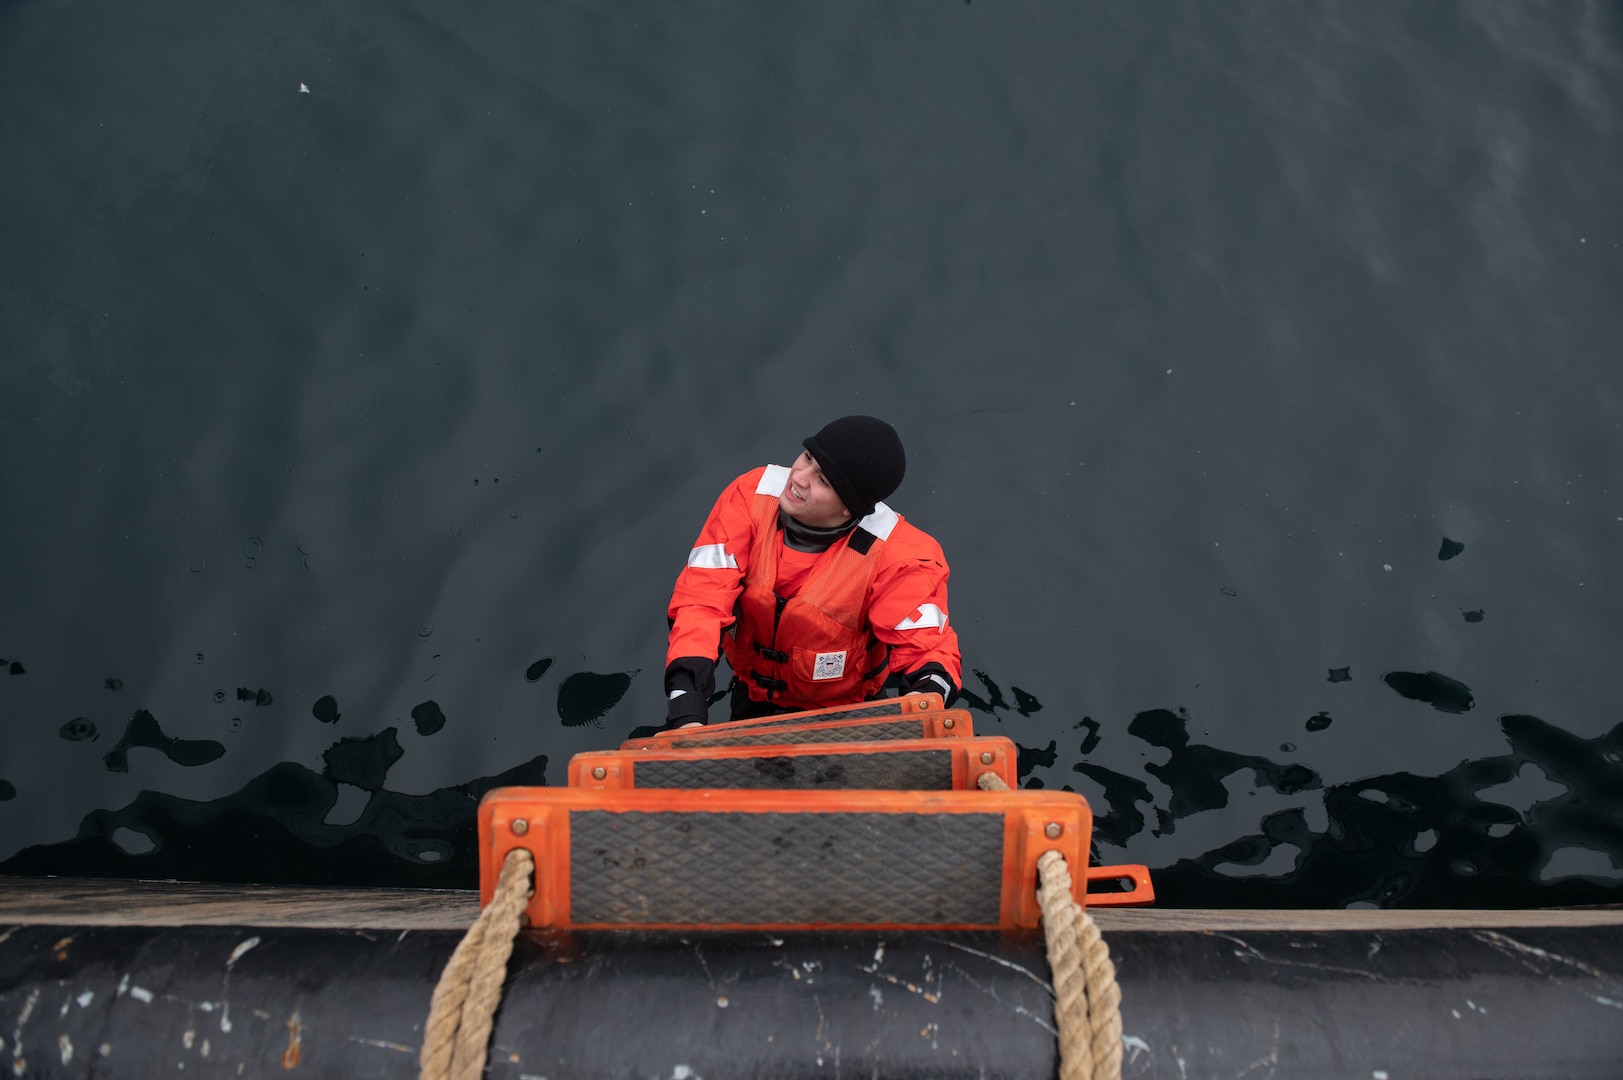 U.S. Coast Guard Cutter Sycamore (WLB 209) crew members conduct a dry suit test in preparation for Exercise Argus, Nuuk, Greenland, Jun 12, 2023. Exercise Argus is a joint search and rescue and marine environmental response exercise that includes assets from the United States, Denmark, Greenland, and France. (U.S. Coast Guard photo by Petty Officer 2nd Class Ryan Schultz)